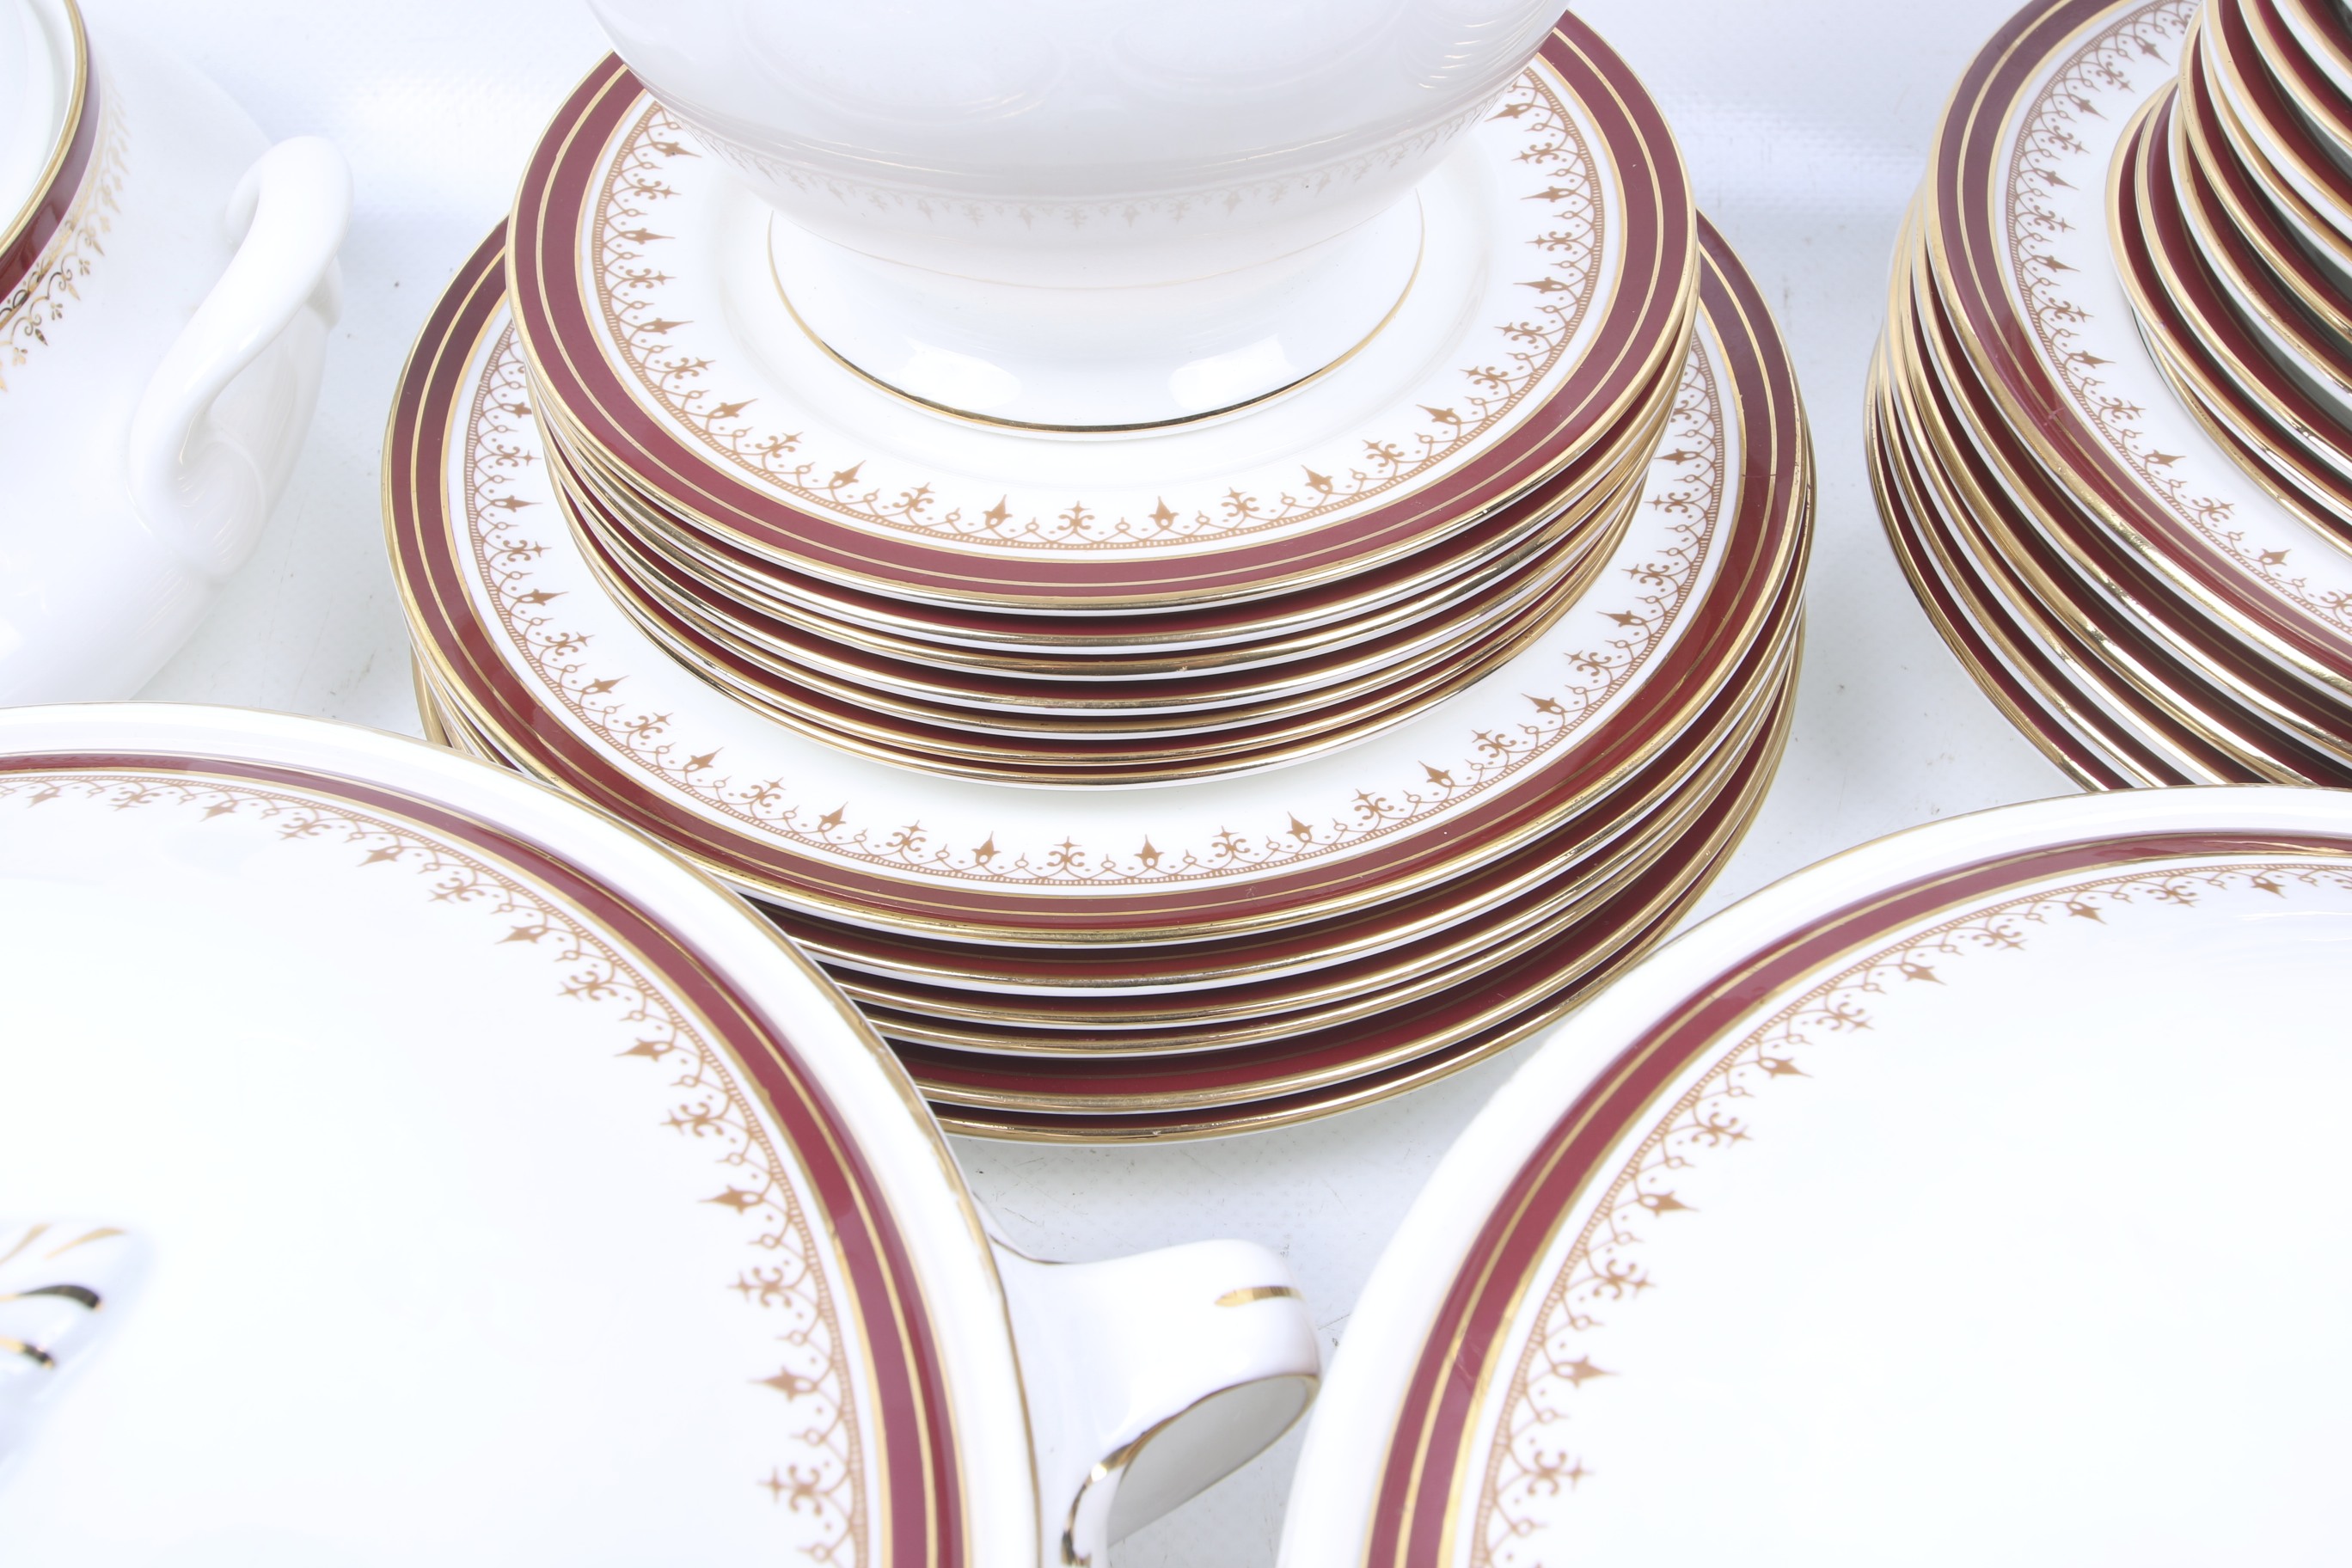 An Aynsley dinner service in white with red and gilt borders. - Image 2 of 3